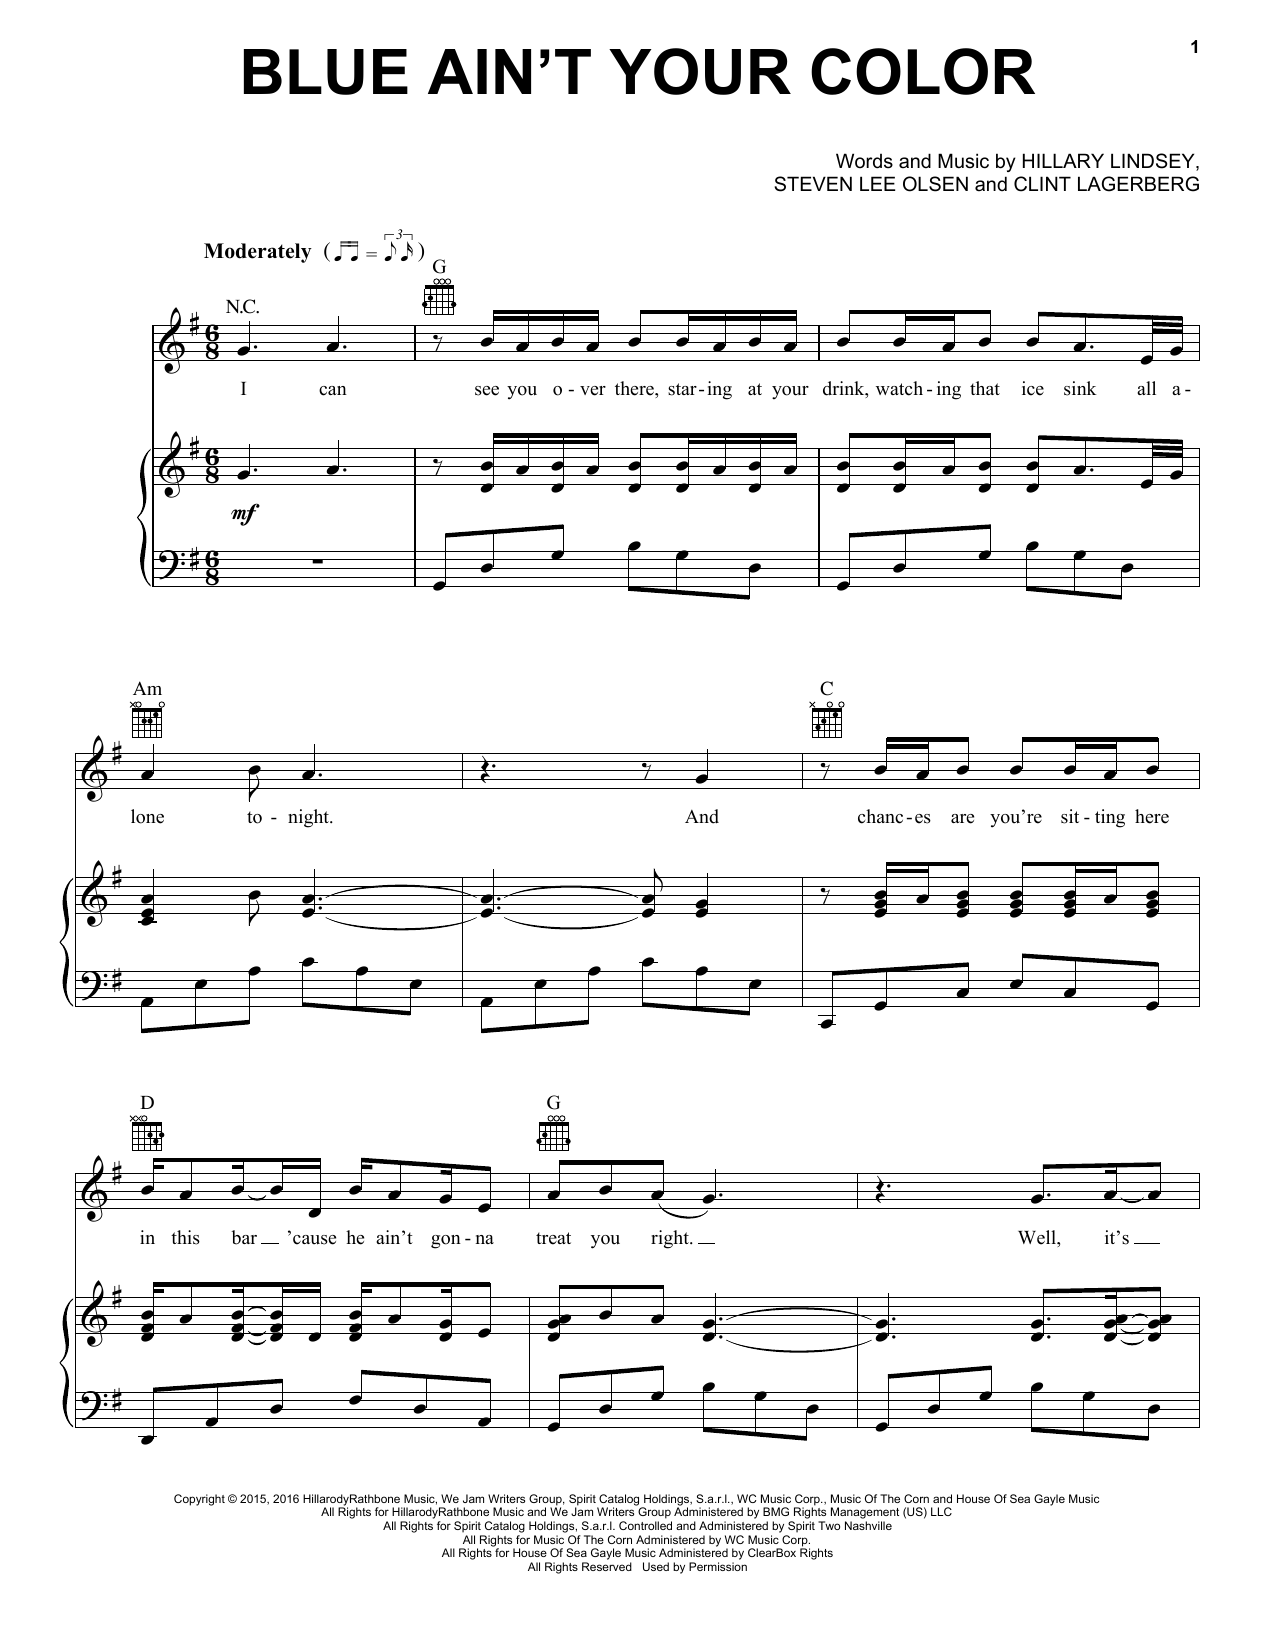 Download Keith Urban Blue Ain't Your Color Sheet Music